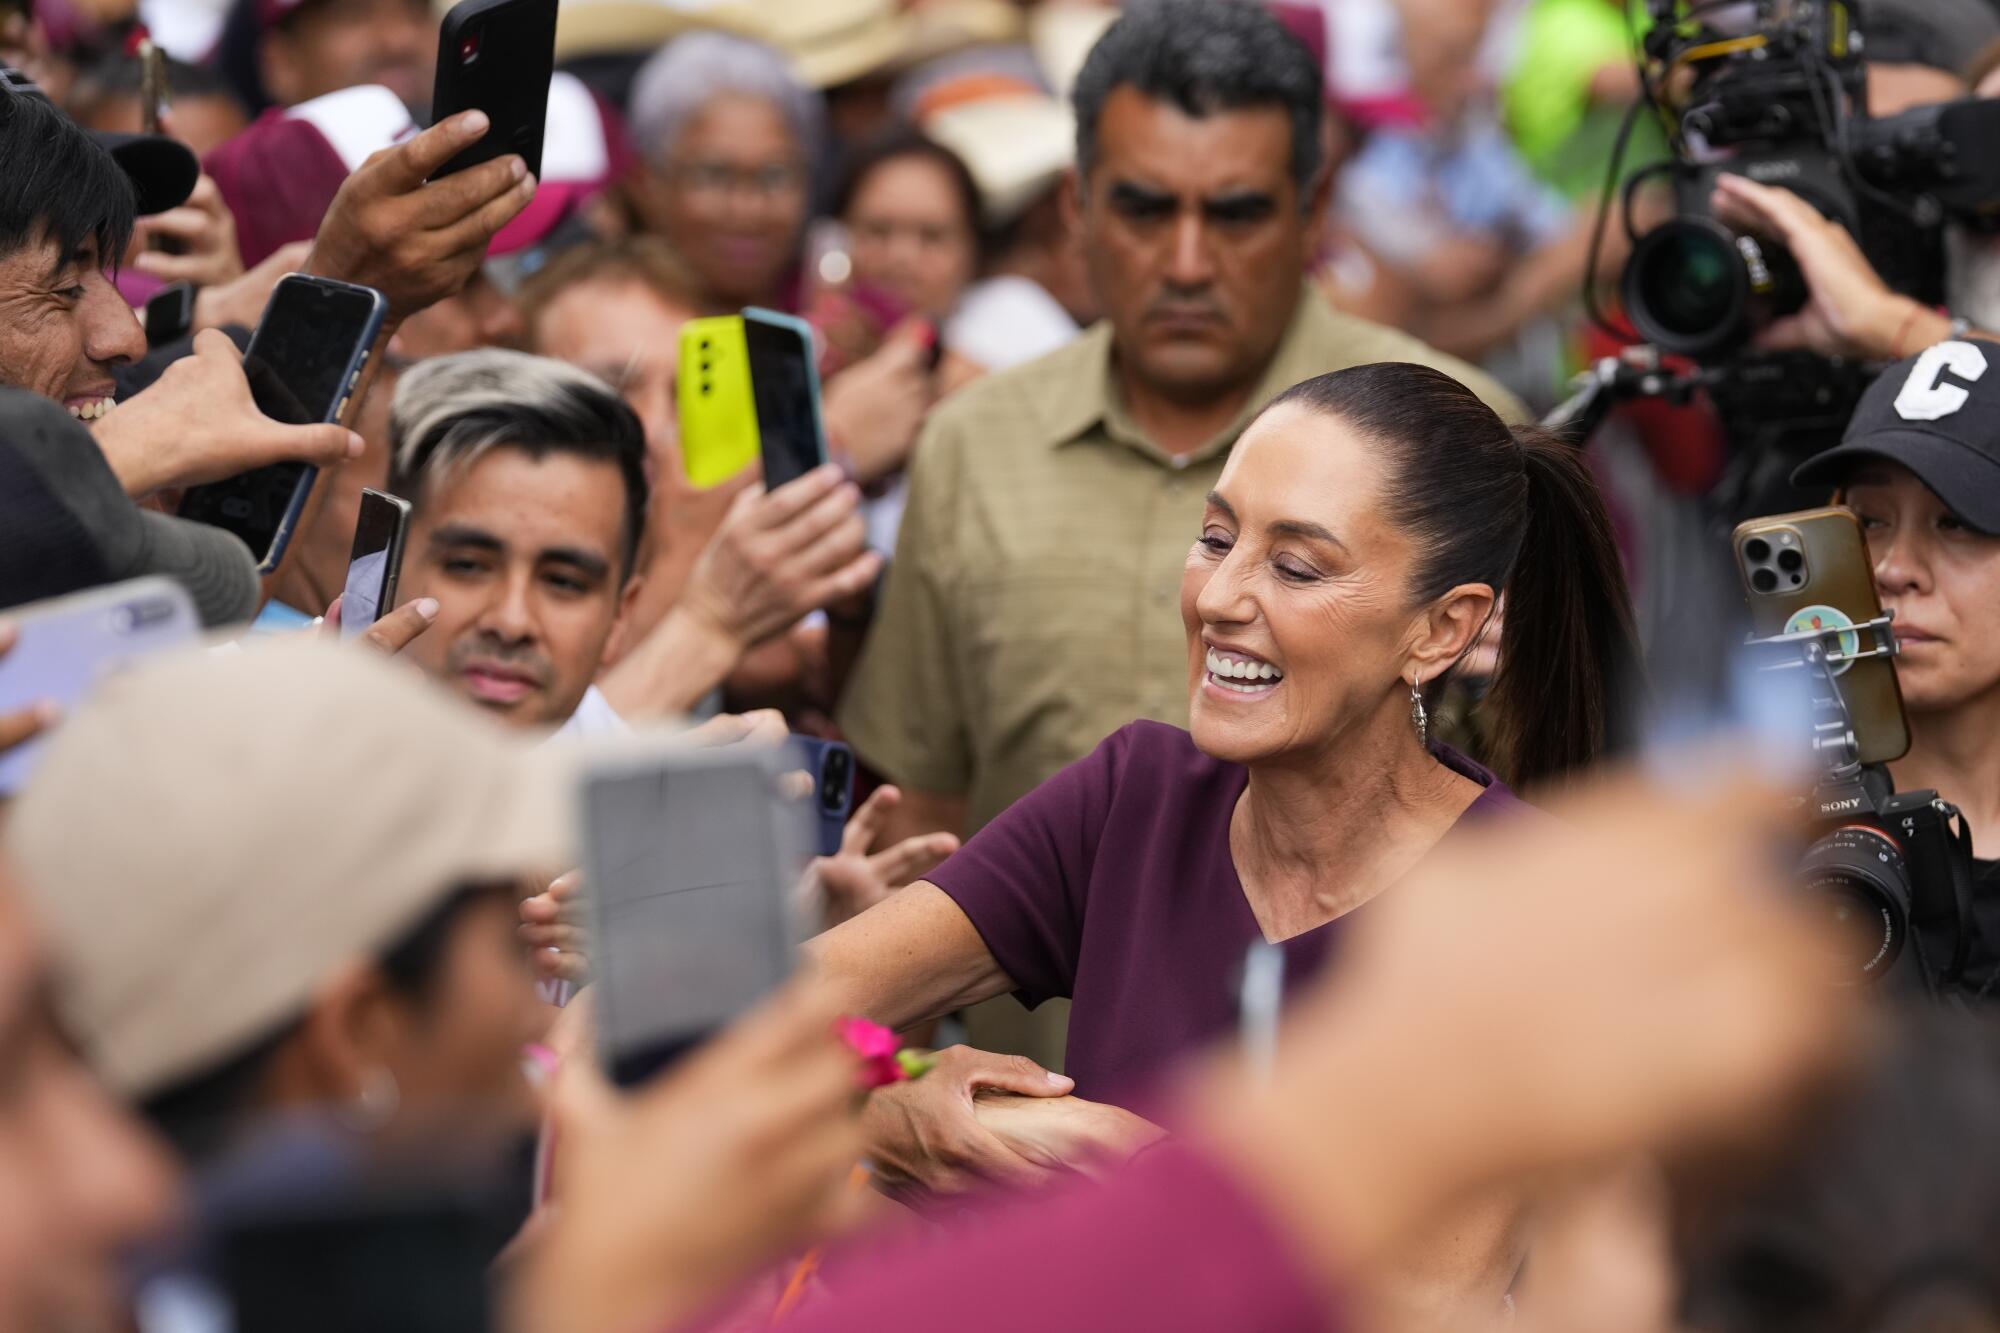 A woman with her hair pulled back in a ponytail smiles and reaches out to greet people surrounding her.